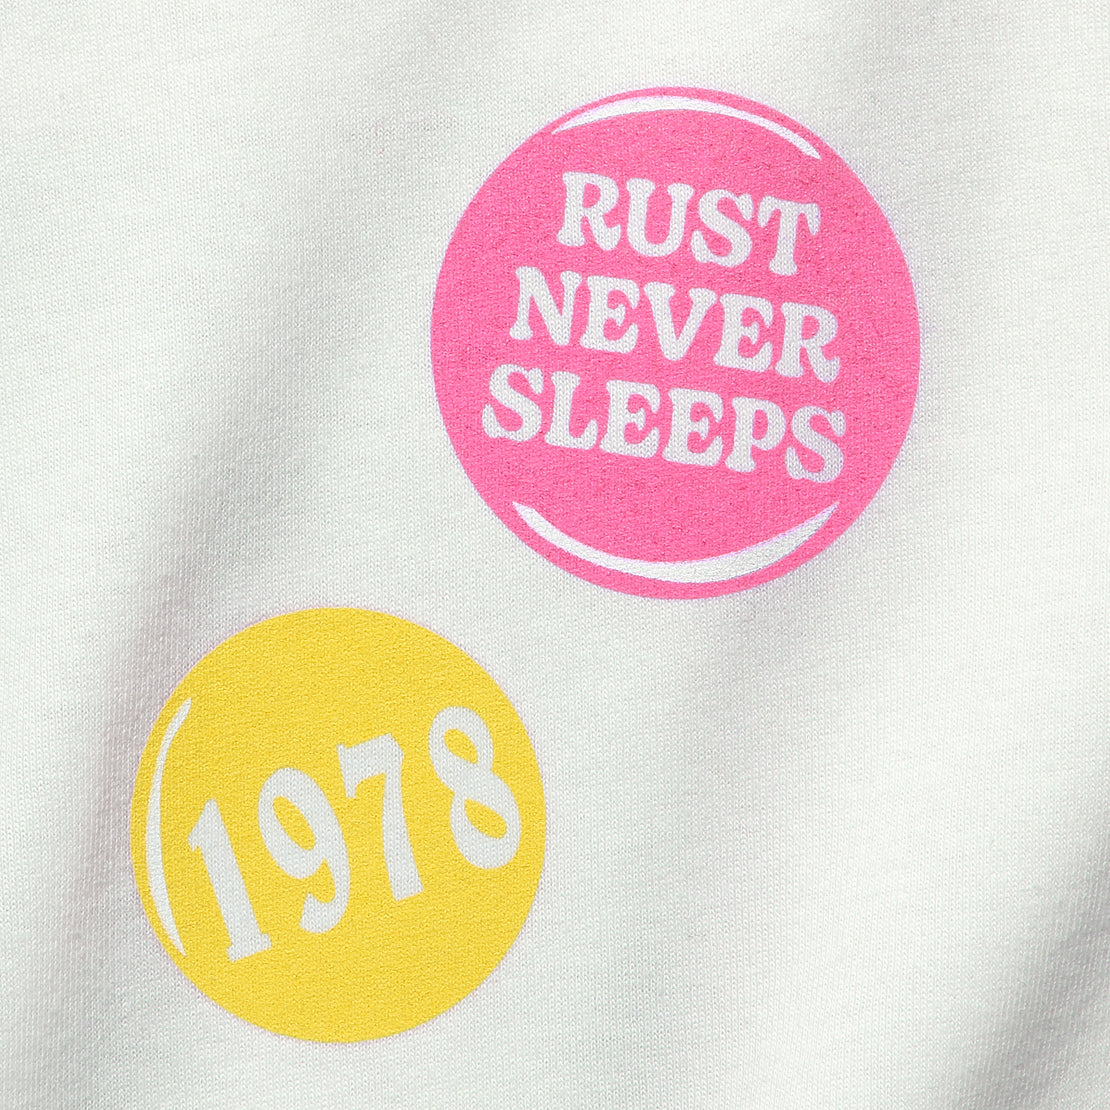 Rust Never Sleeps Tee - White - TSPTR - STAG Provisions - Tops - S/S Tee - Graphic